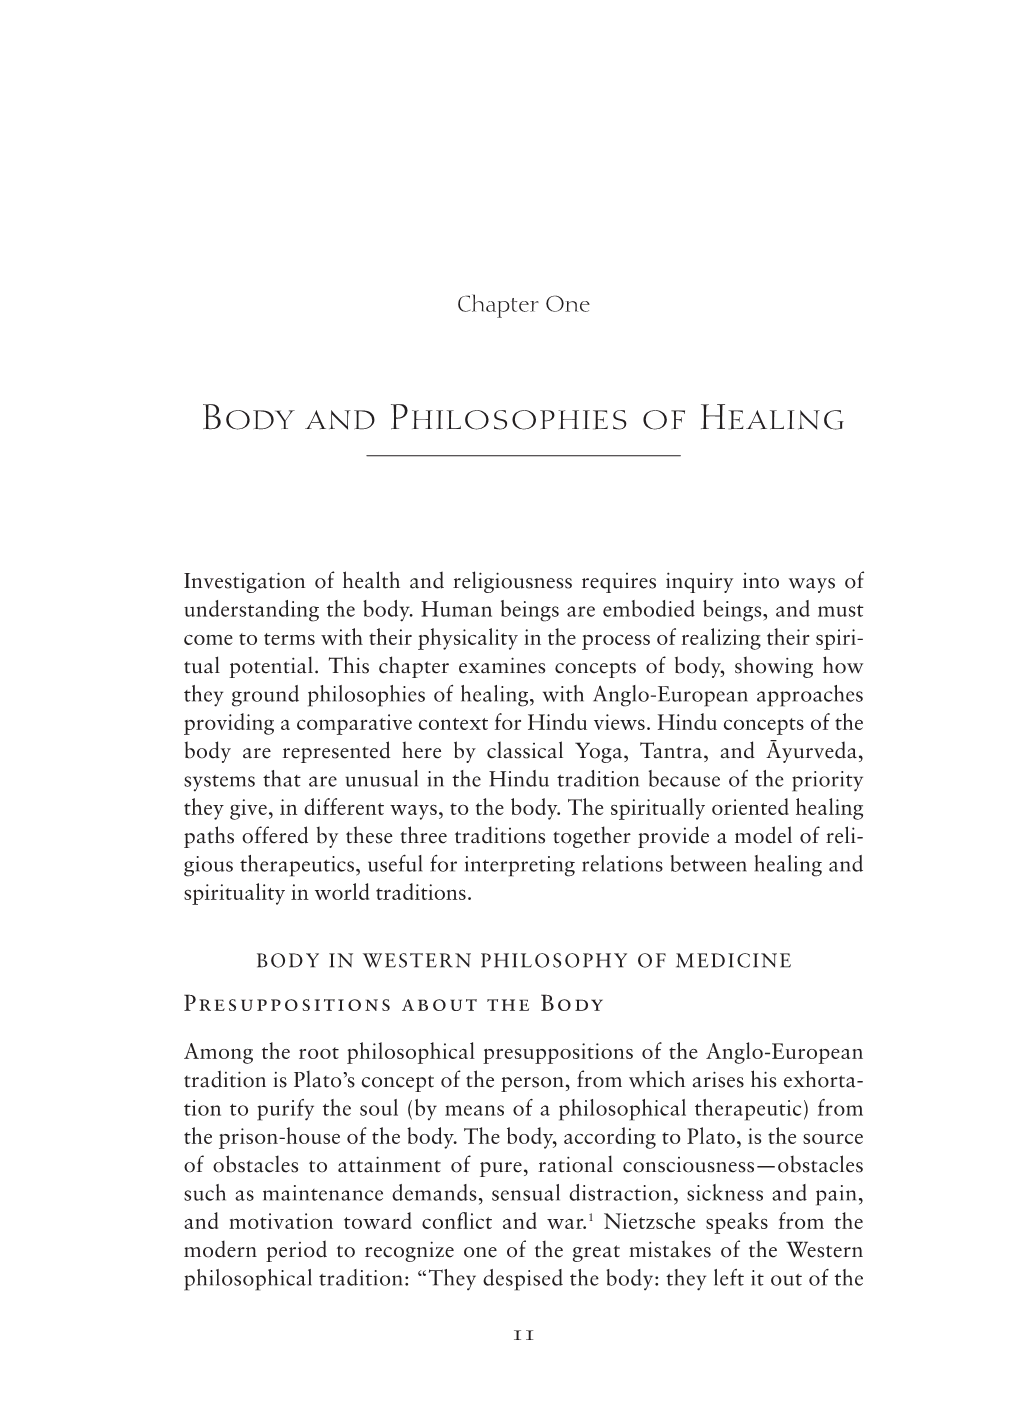 Body and Philosophies of Healing